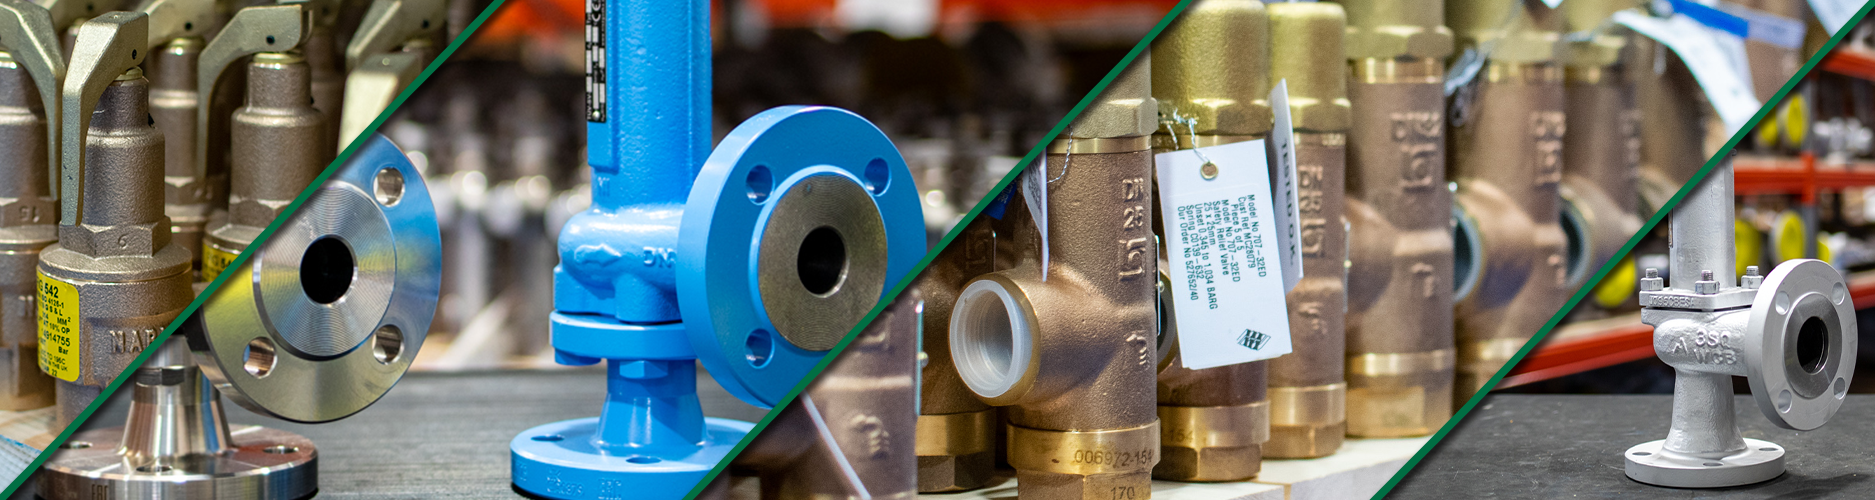 Safety Valves Online - The one stop shop for all of your safety relief valve requirements